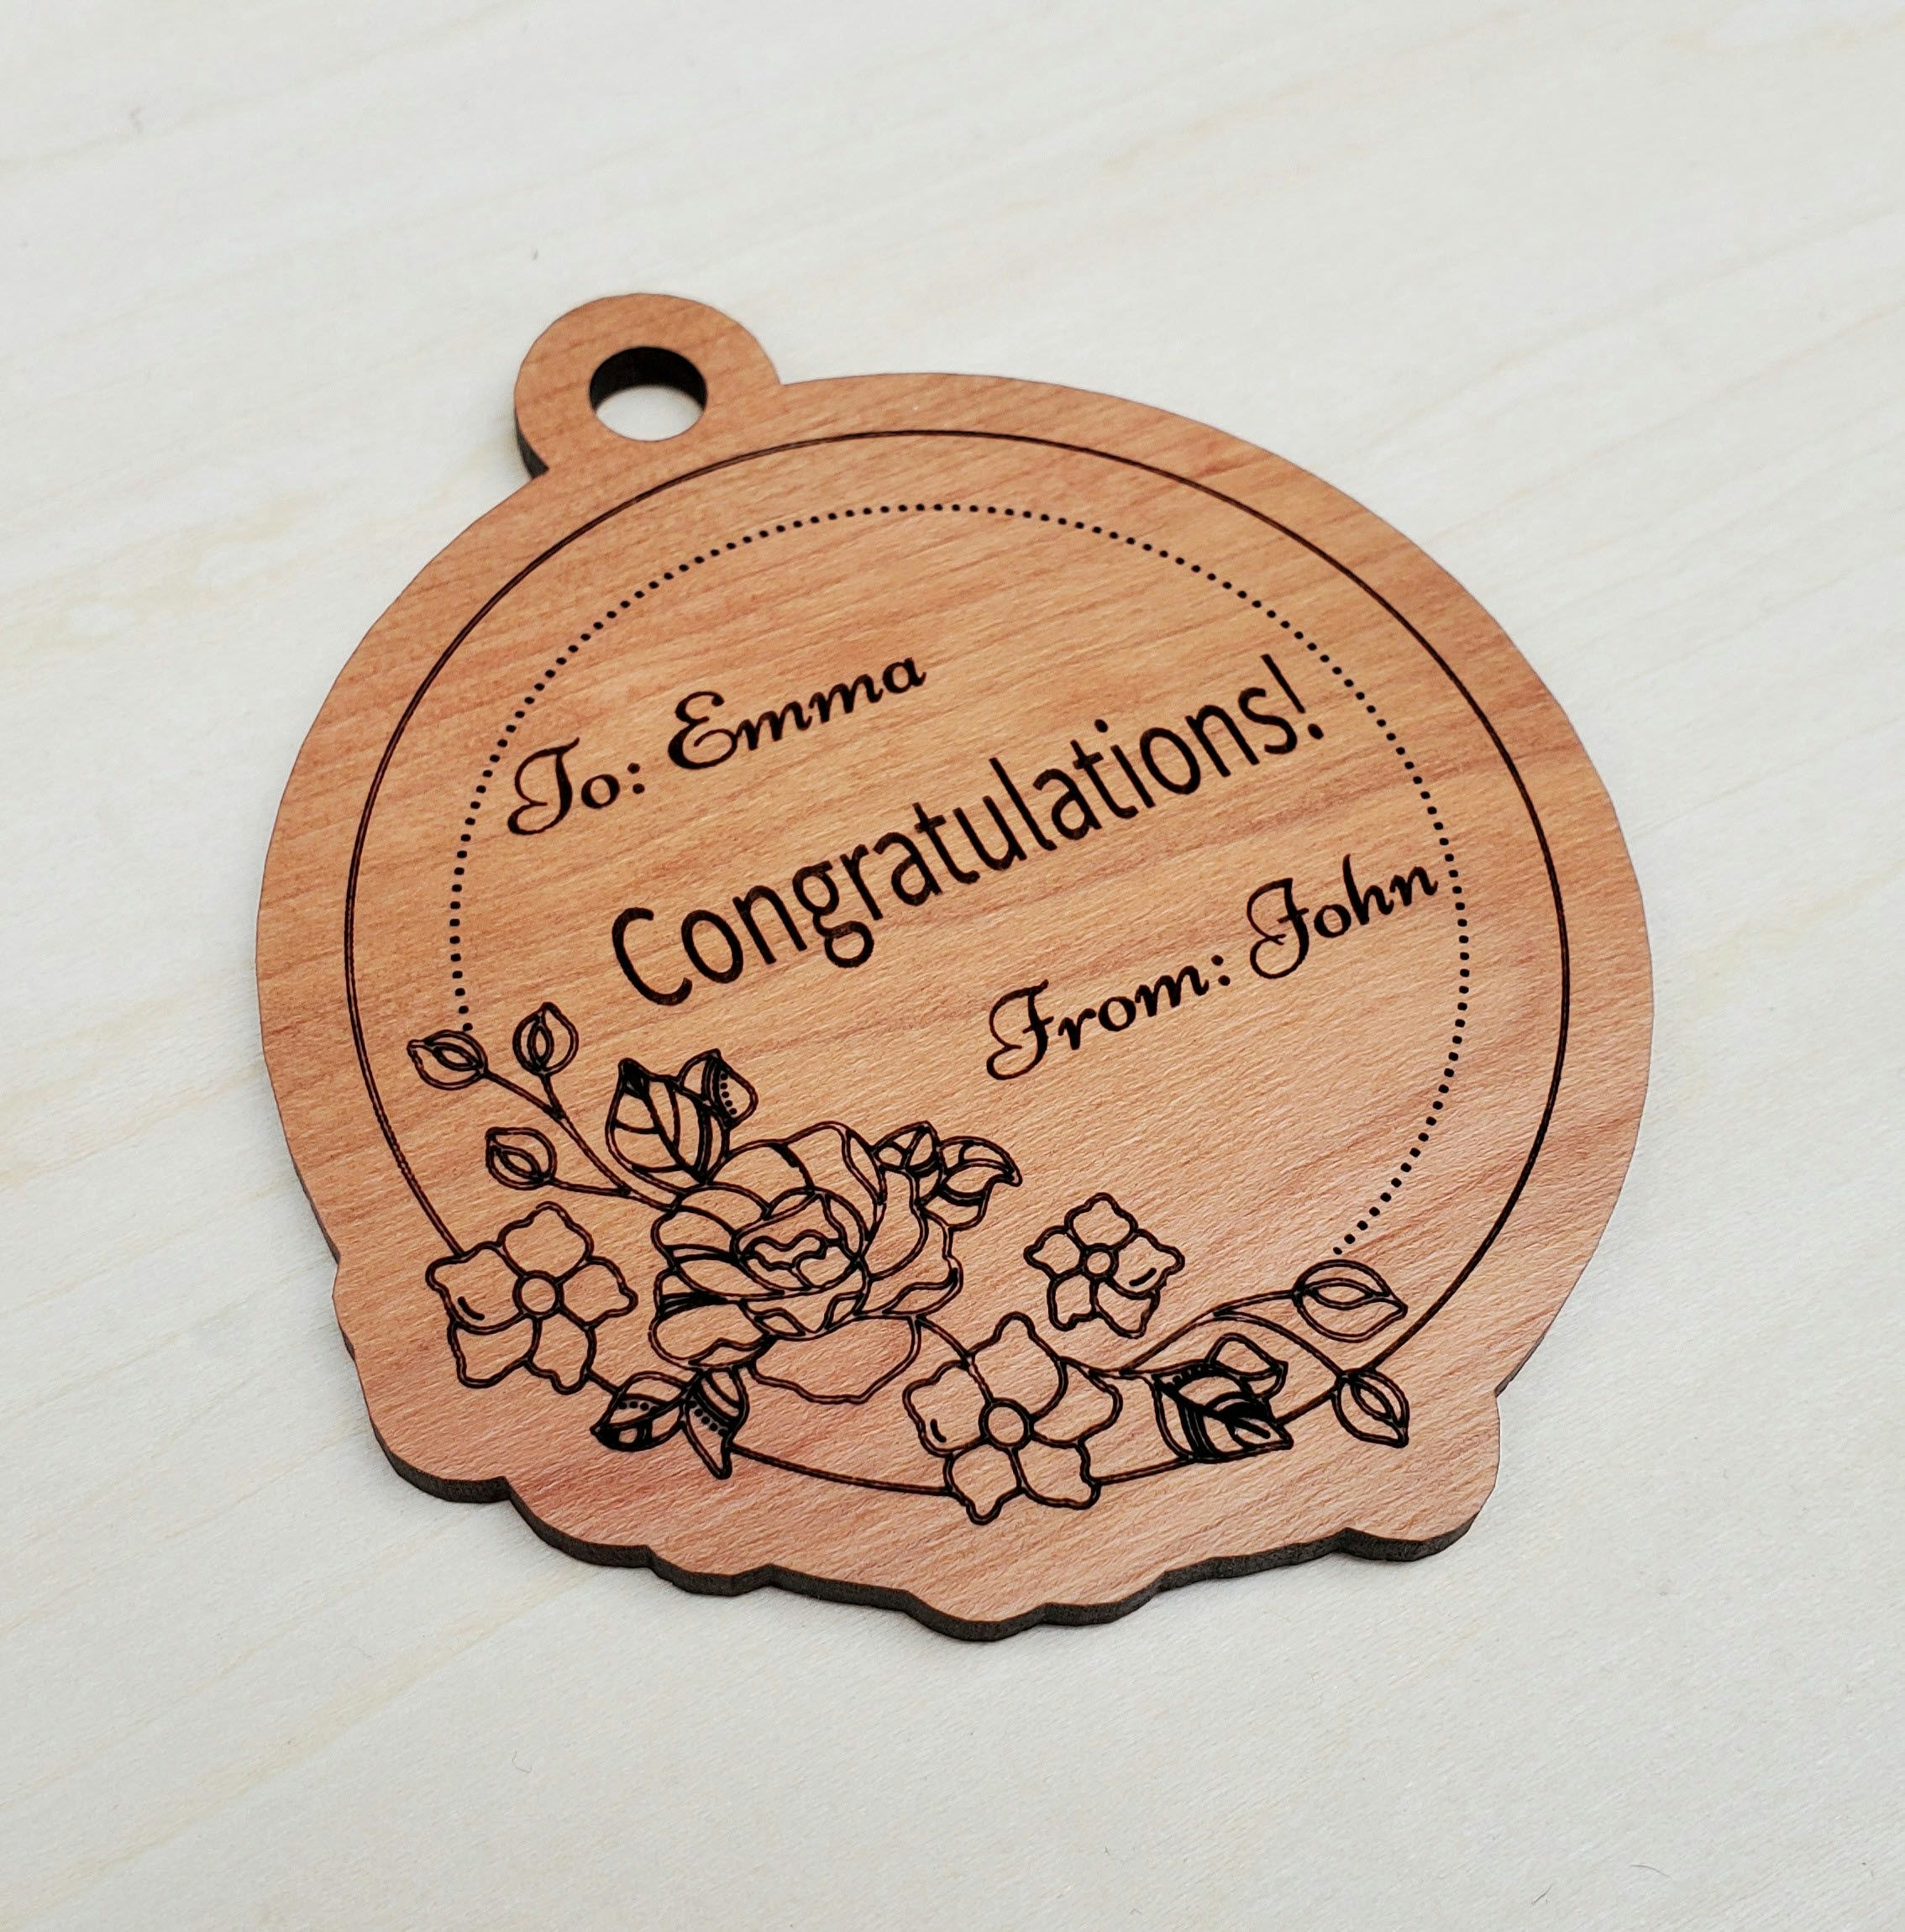 Completed, laser cut & engraved gift tag